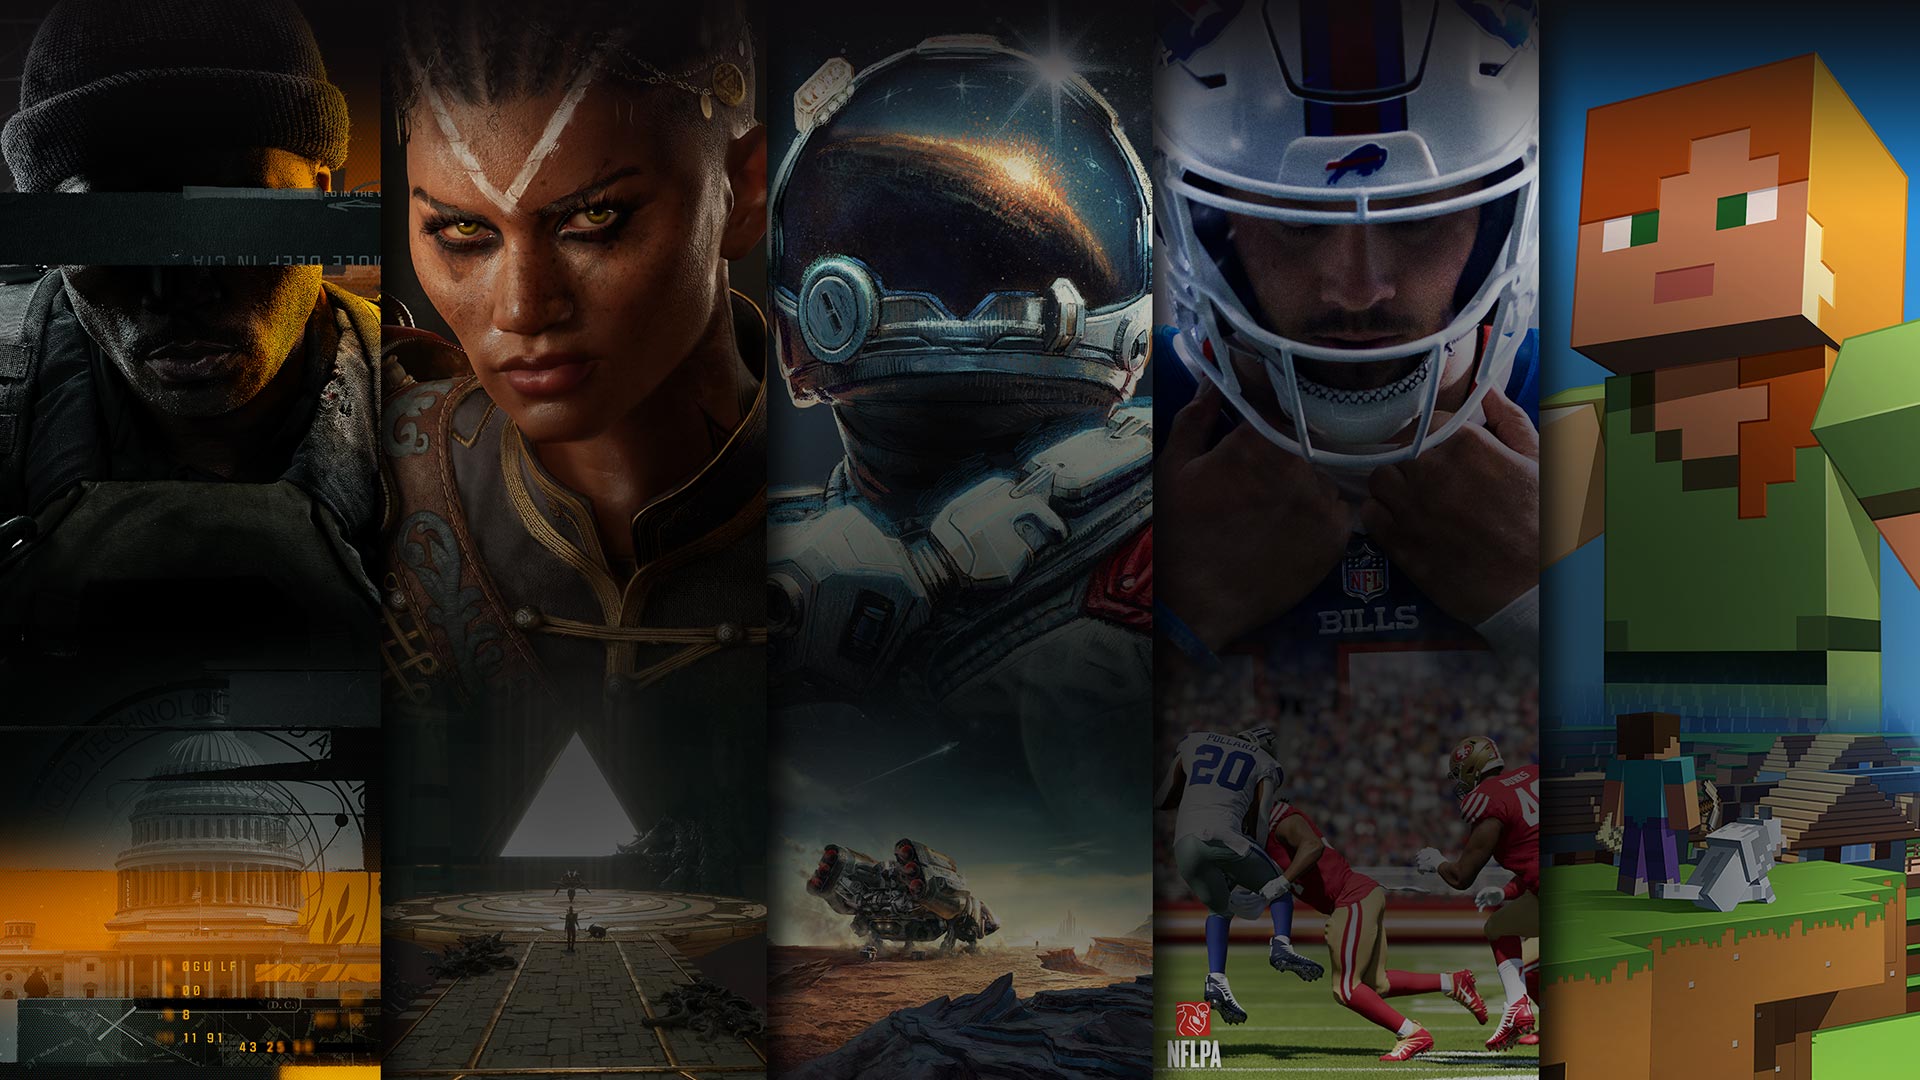 Game art from multiple games available with Xbox Game Pass including Call of Duty - Black Ops 6, Flintlock - The Siege of Dawn, Starfield, Madden NFL 24 and Minecraft